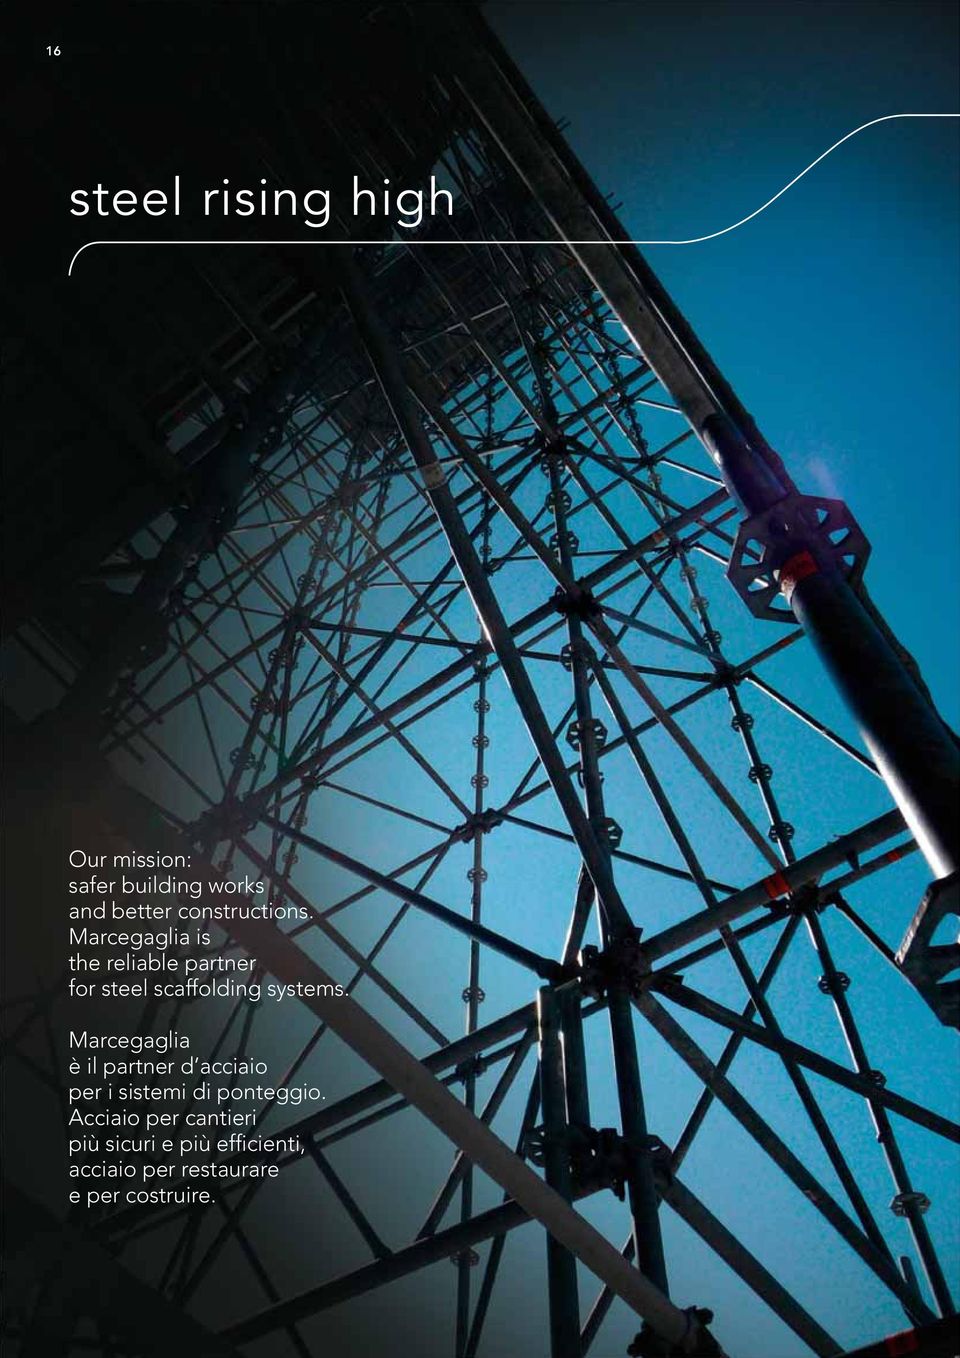 Marcegaglia is the reliable partner for steel scaffolding systems.